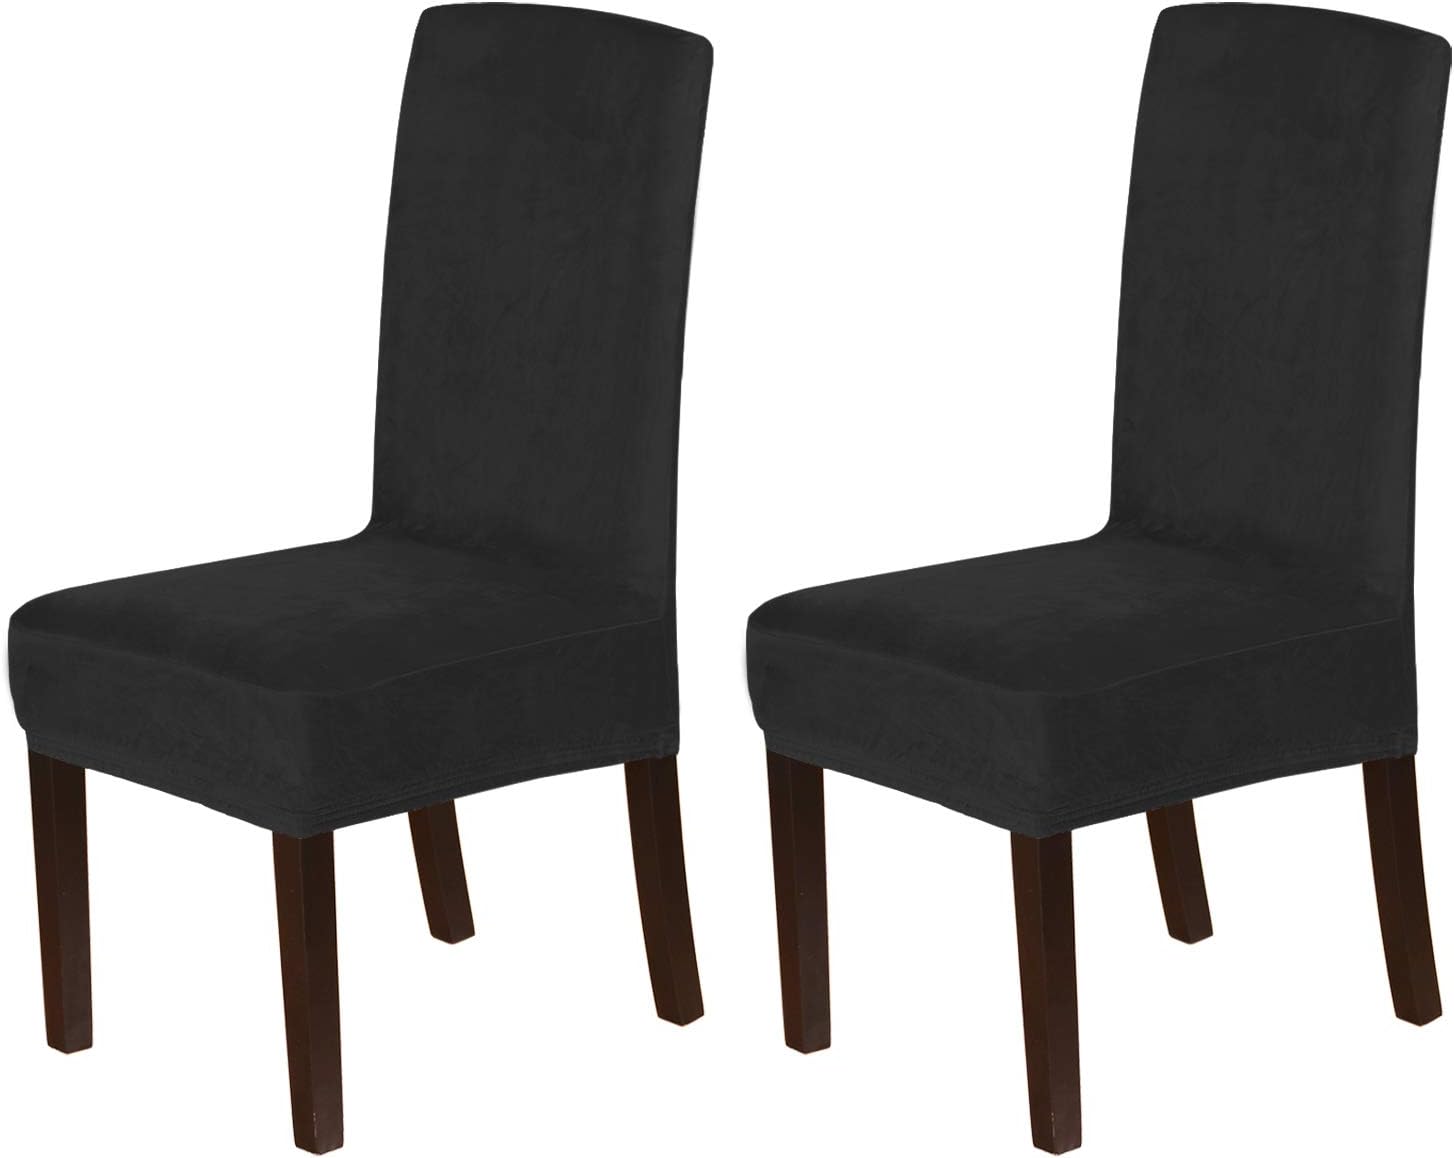 H Versailtex Velvet Dining Chair Covers, Fabric Dining Chair Covers Australia